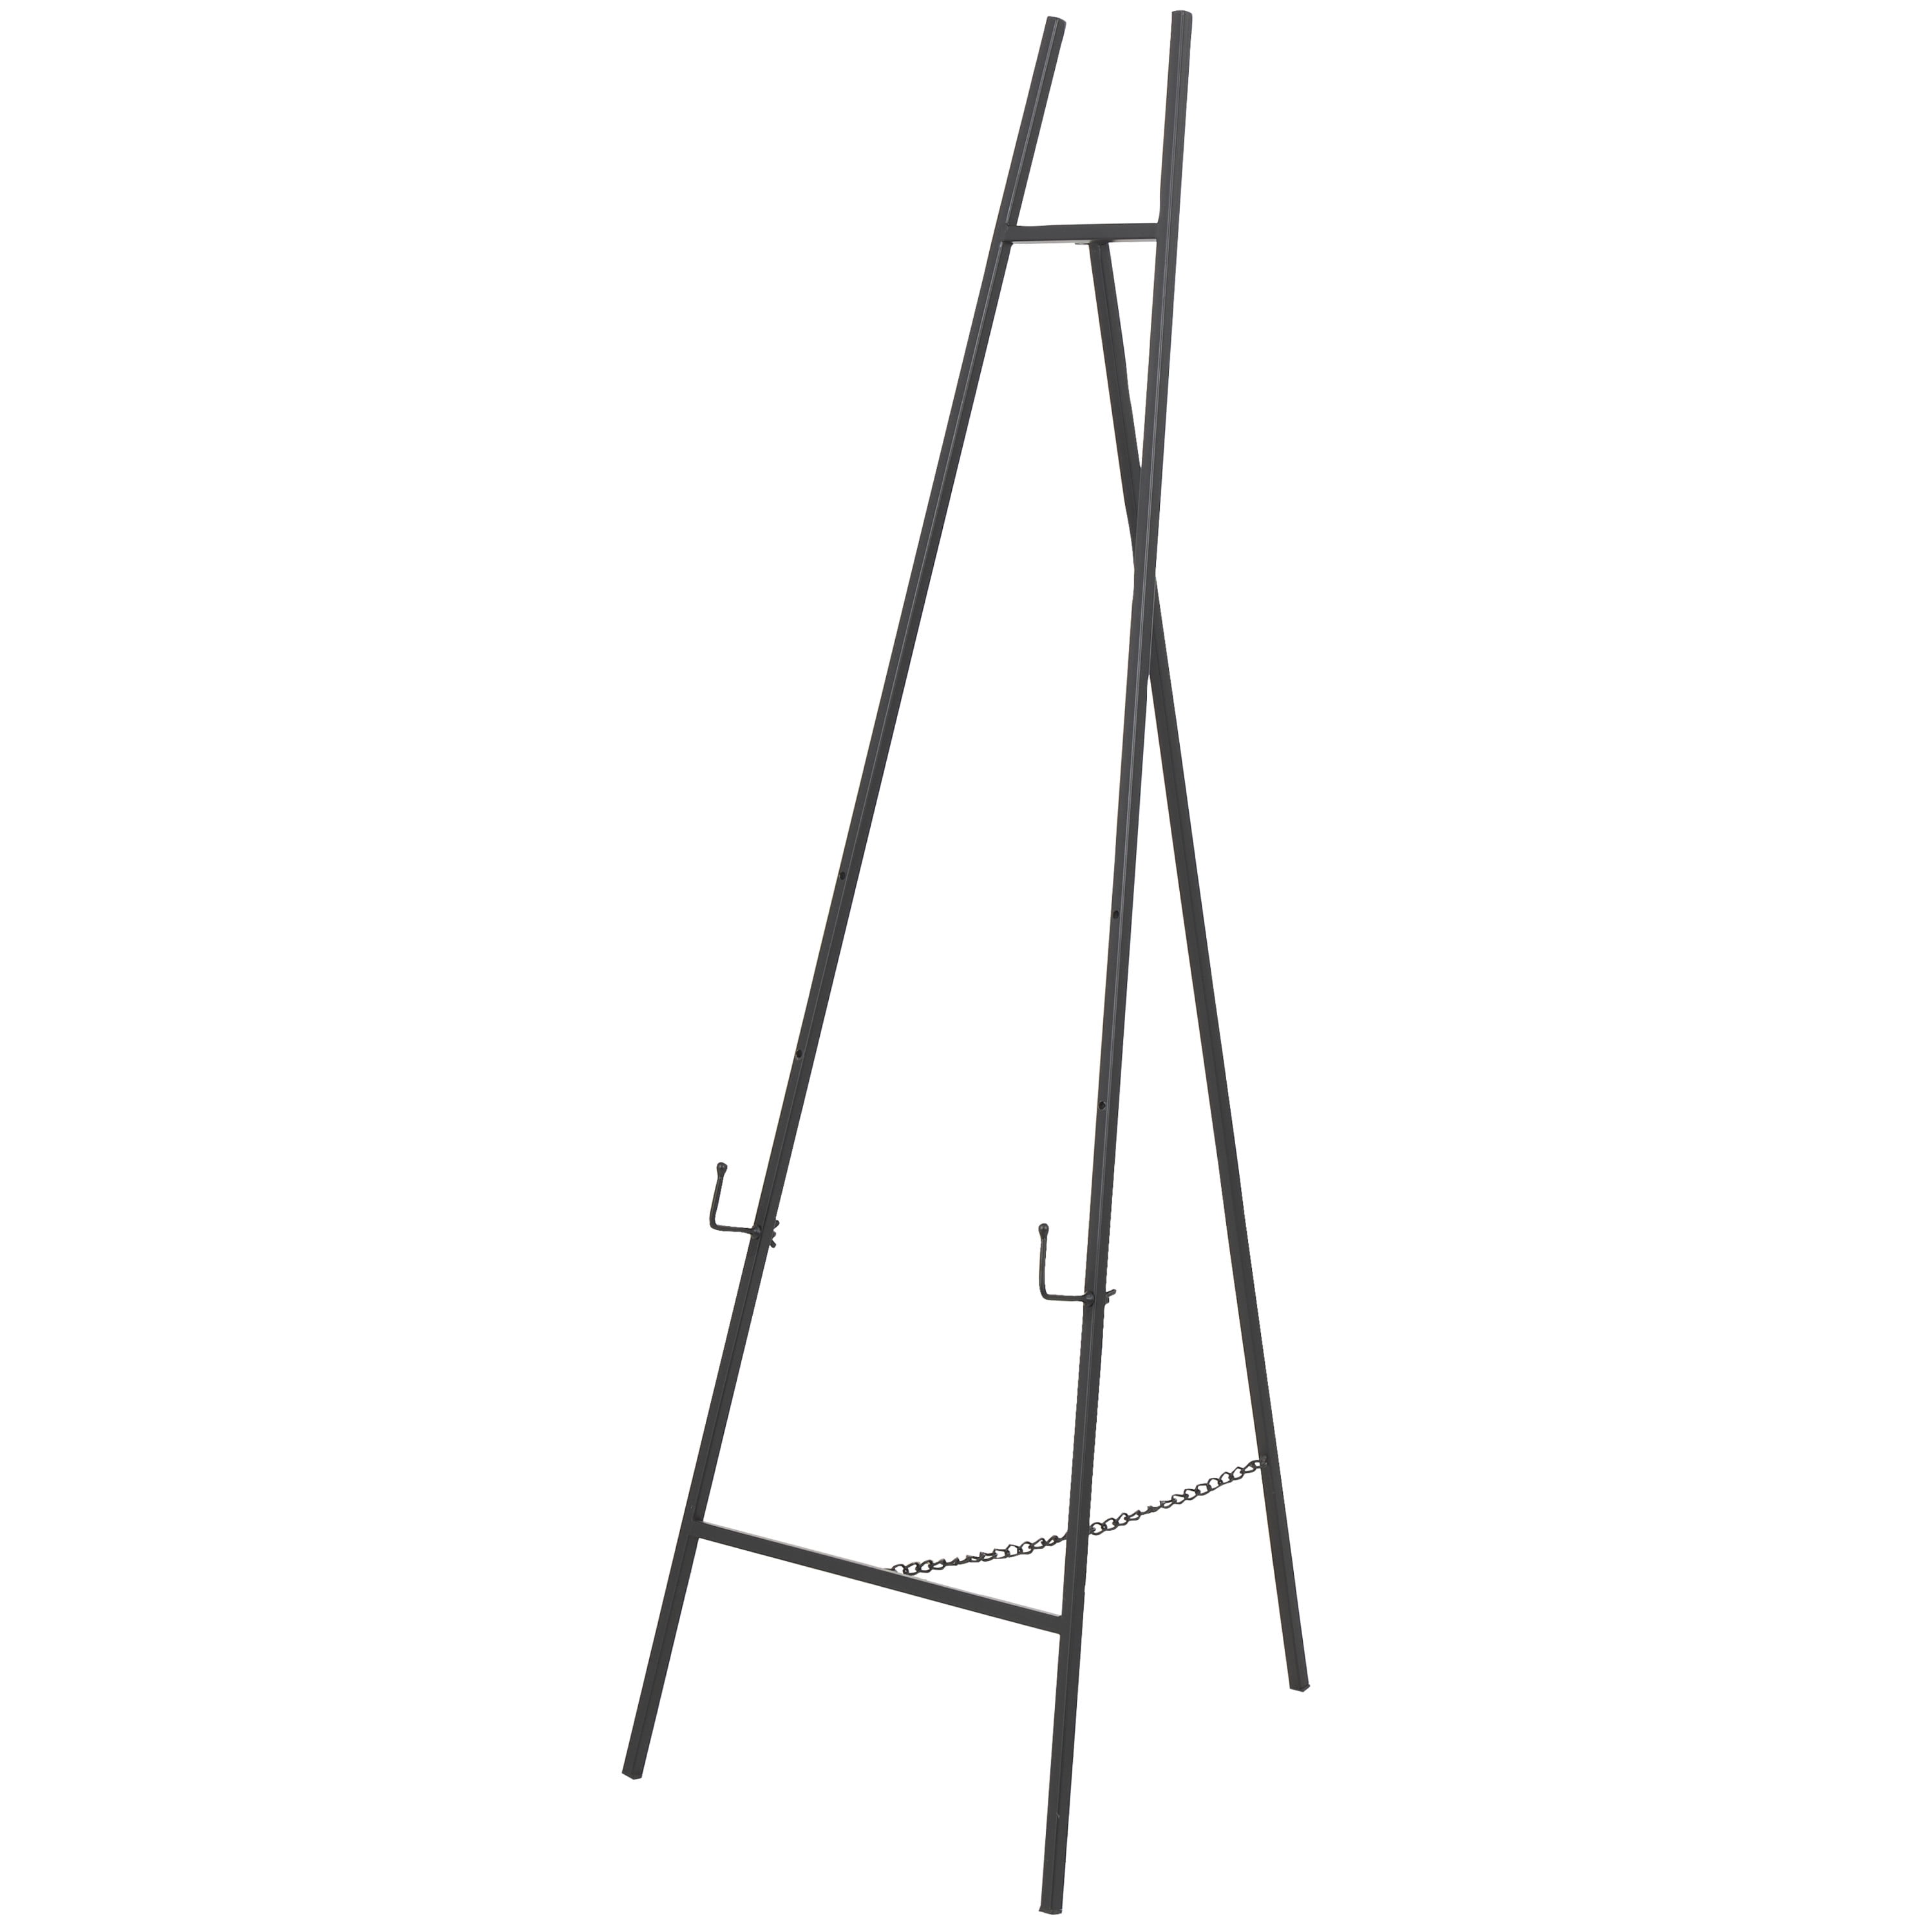 Decolore 5 Pack 3 Inch Small Easel Metal Display Stands Black Iron